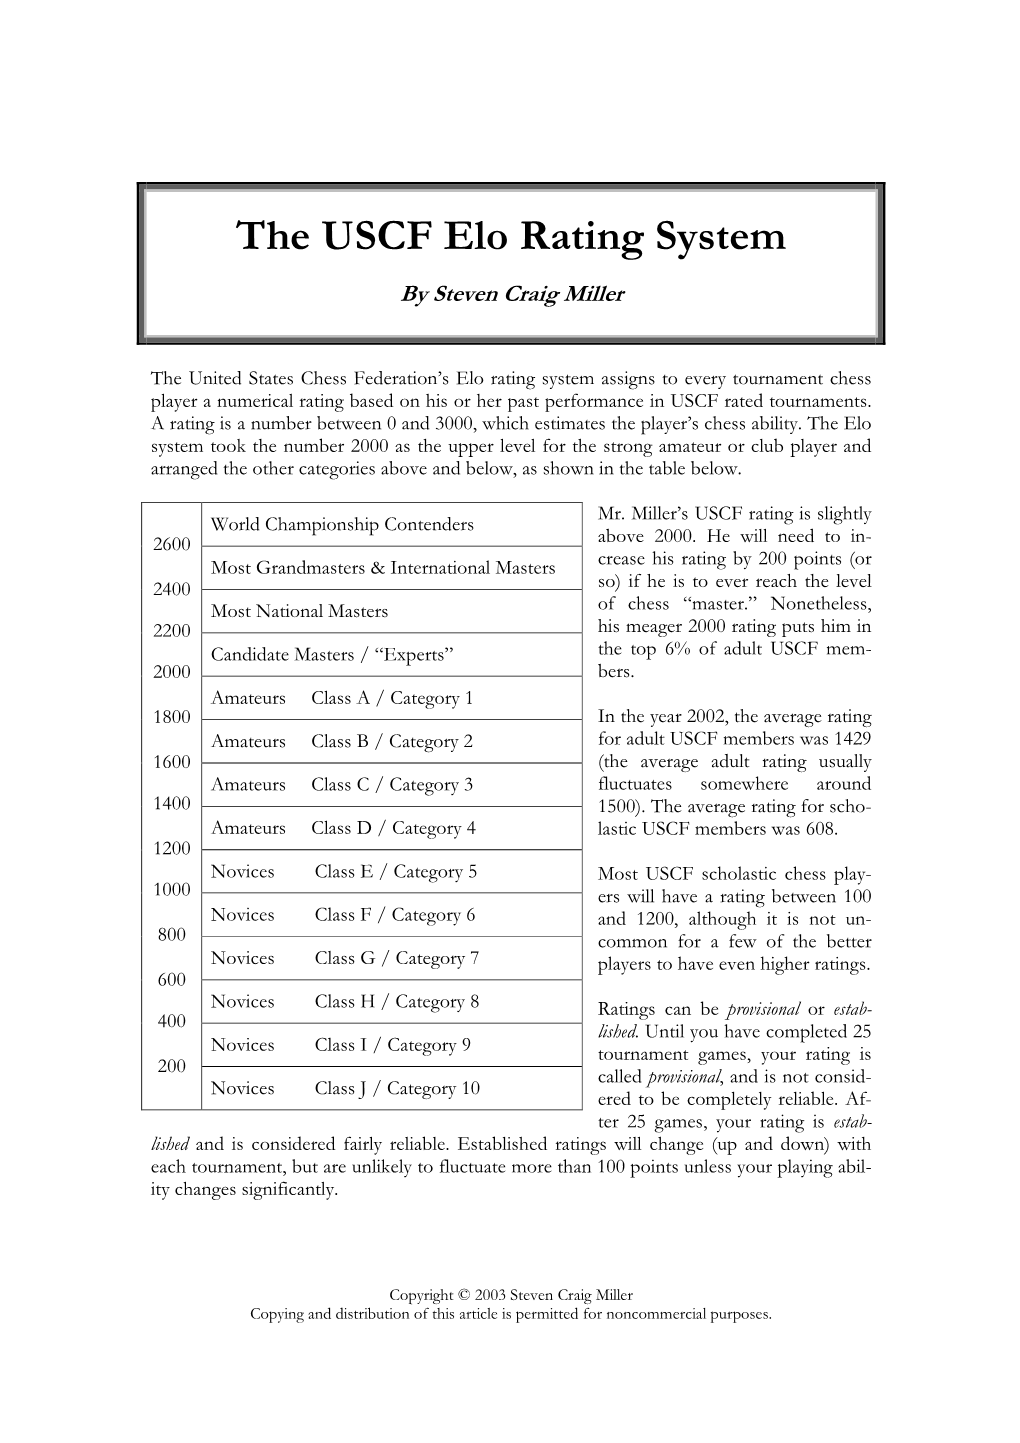 The USCF Elo Rating System by Steven Craig Miller